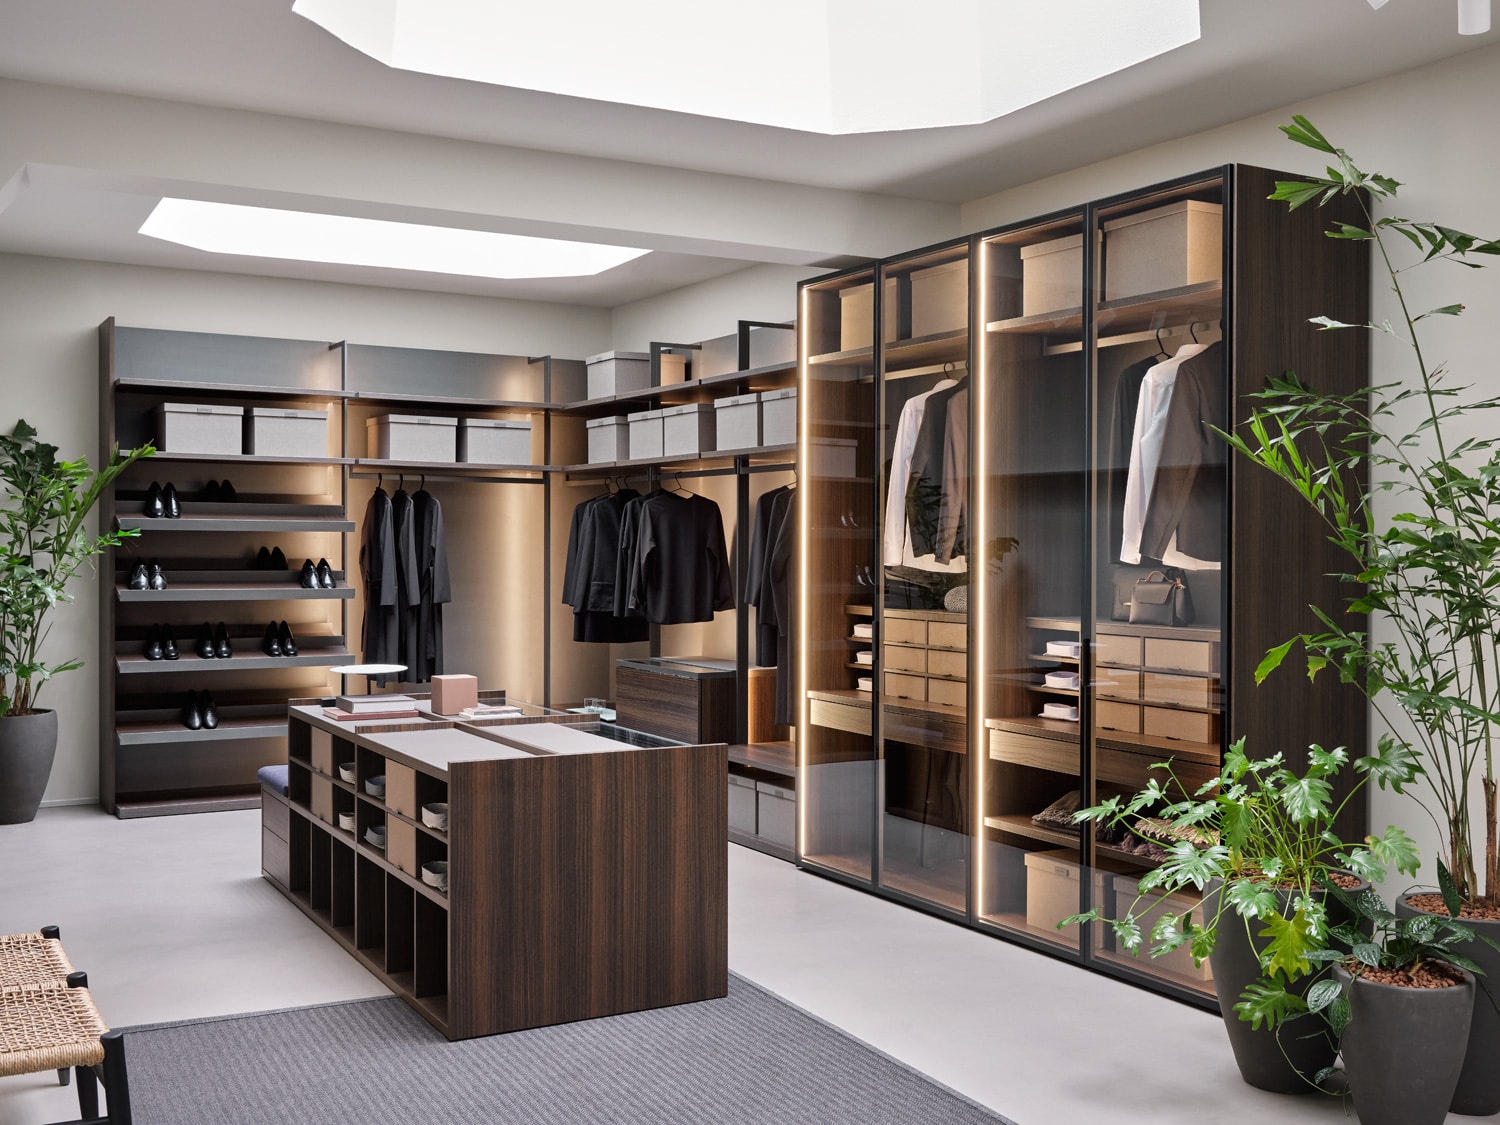 Cabina walk-in closet in Easy Eucalyptus and Piquè finishes with extra clear glass. The combination of modules with different functions creates the perfect solution for storing your entire wardrobe: in or out of sight, hanging or folded.